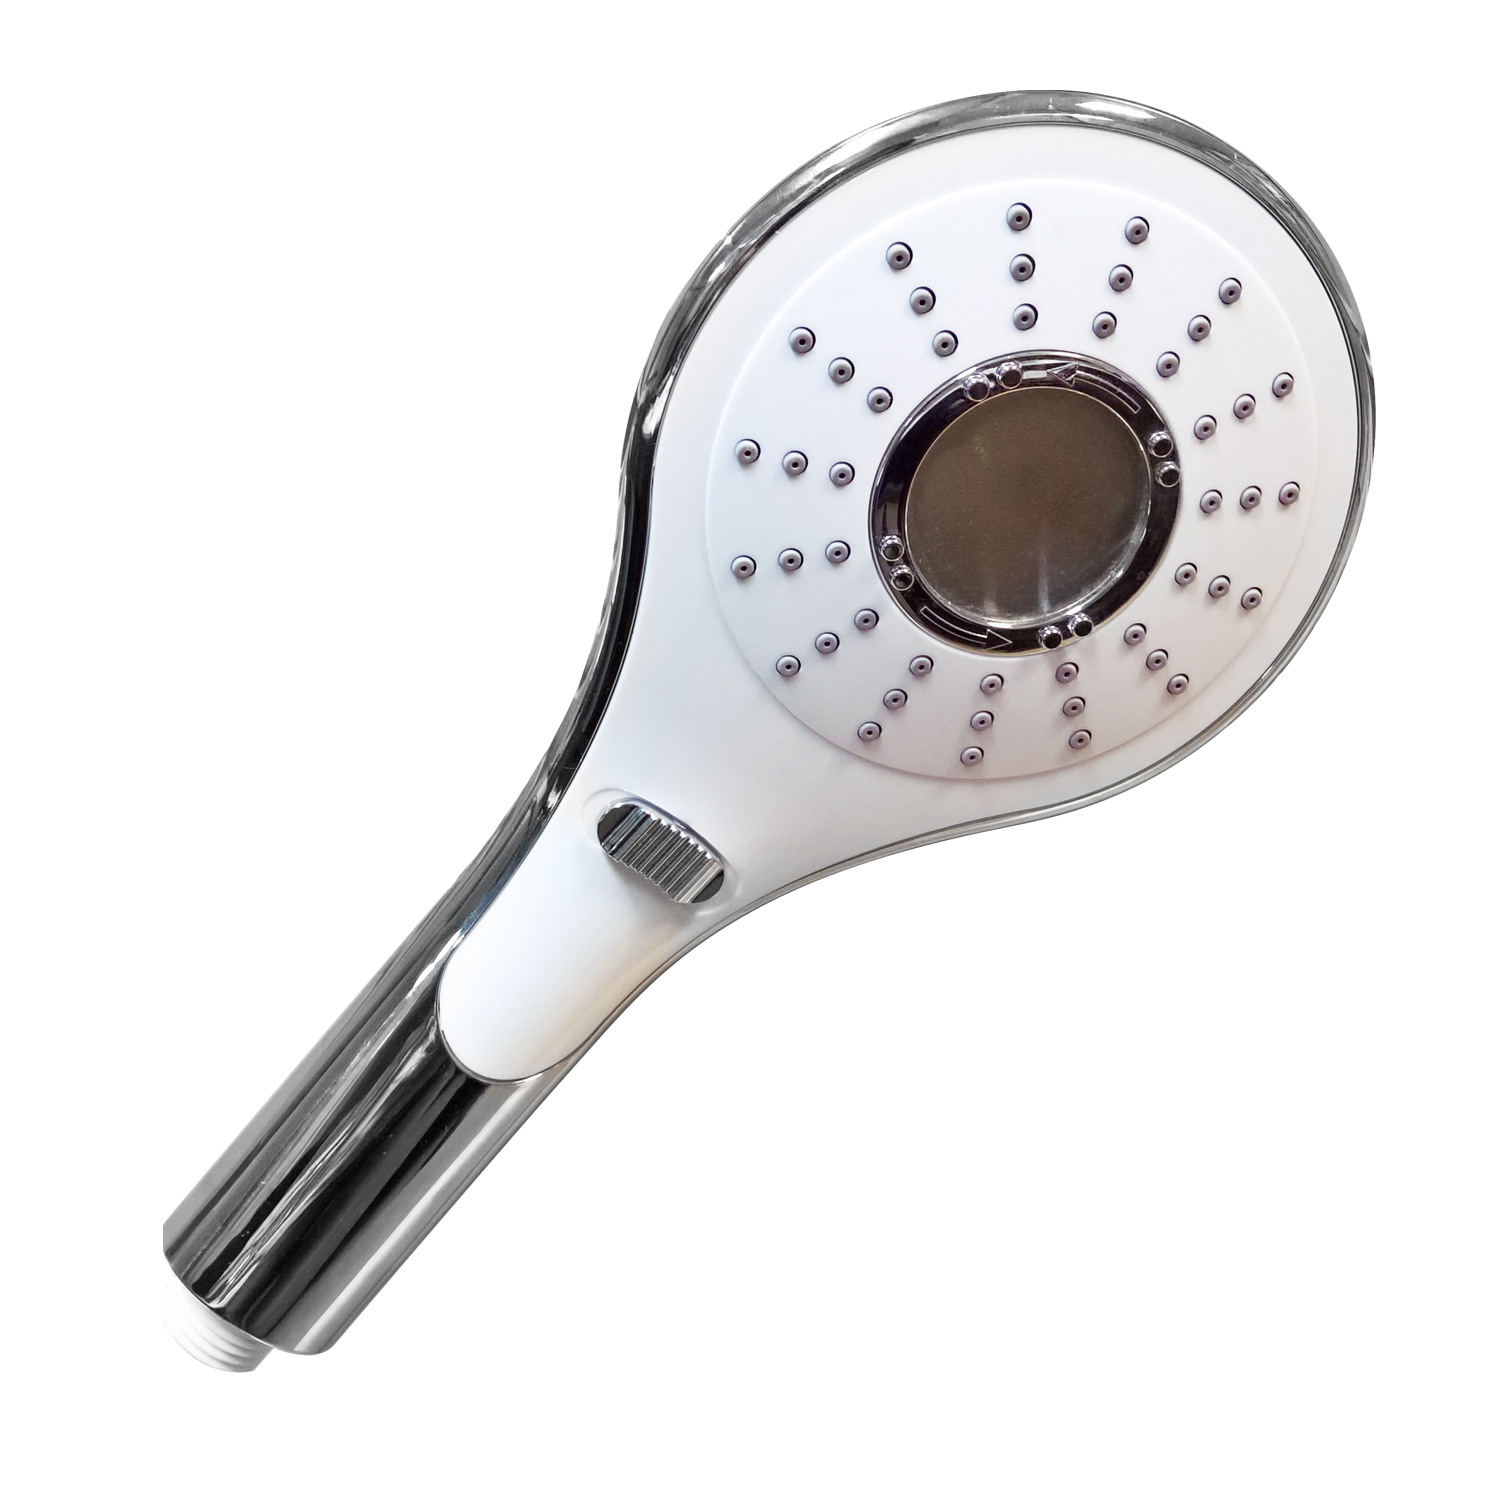 Anti-limestone hand shower with 3 functions